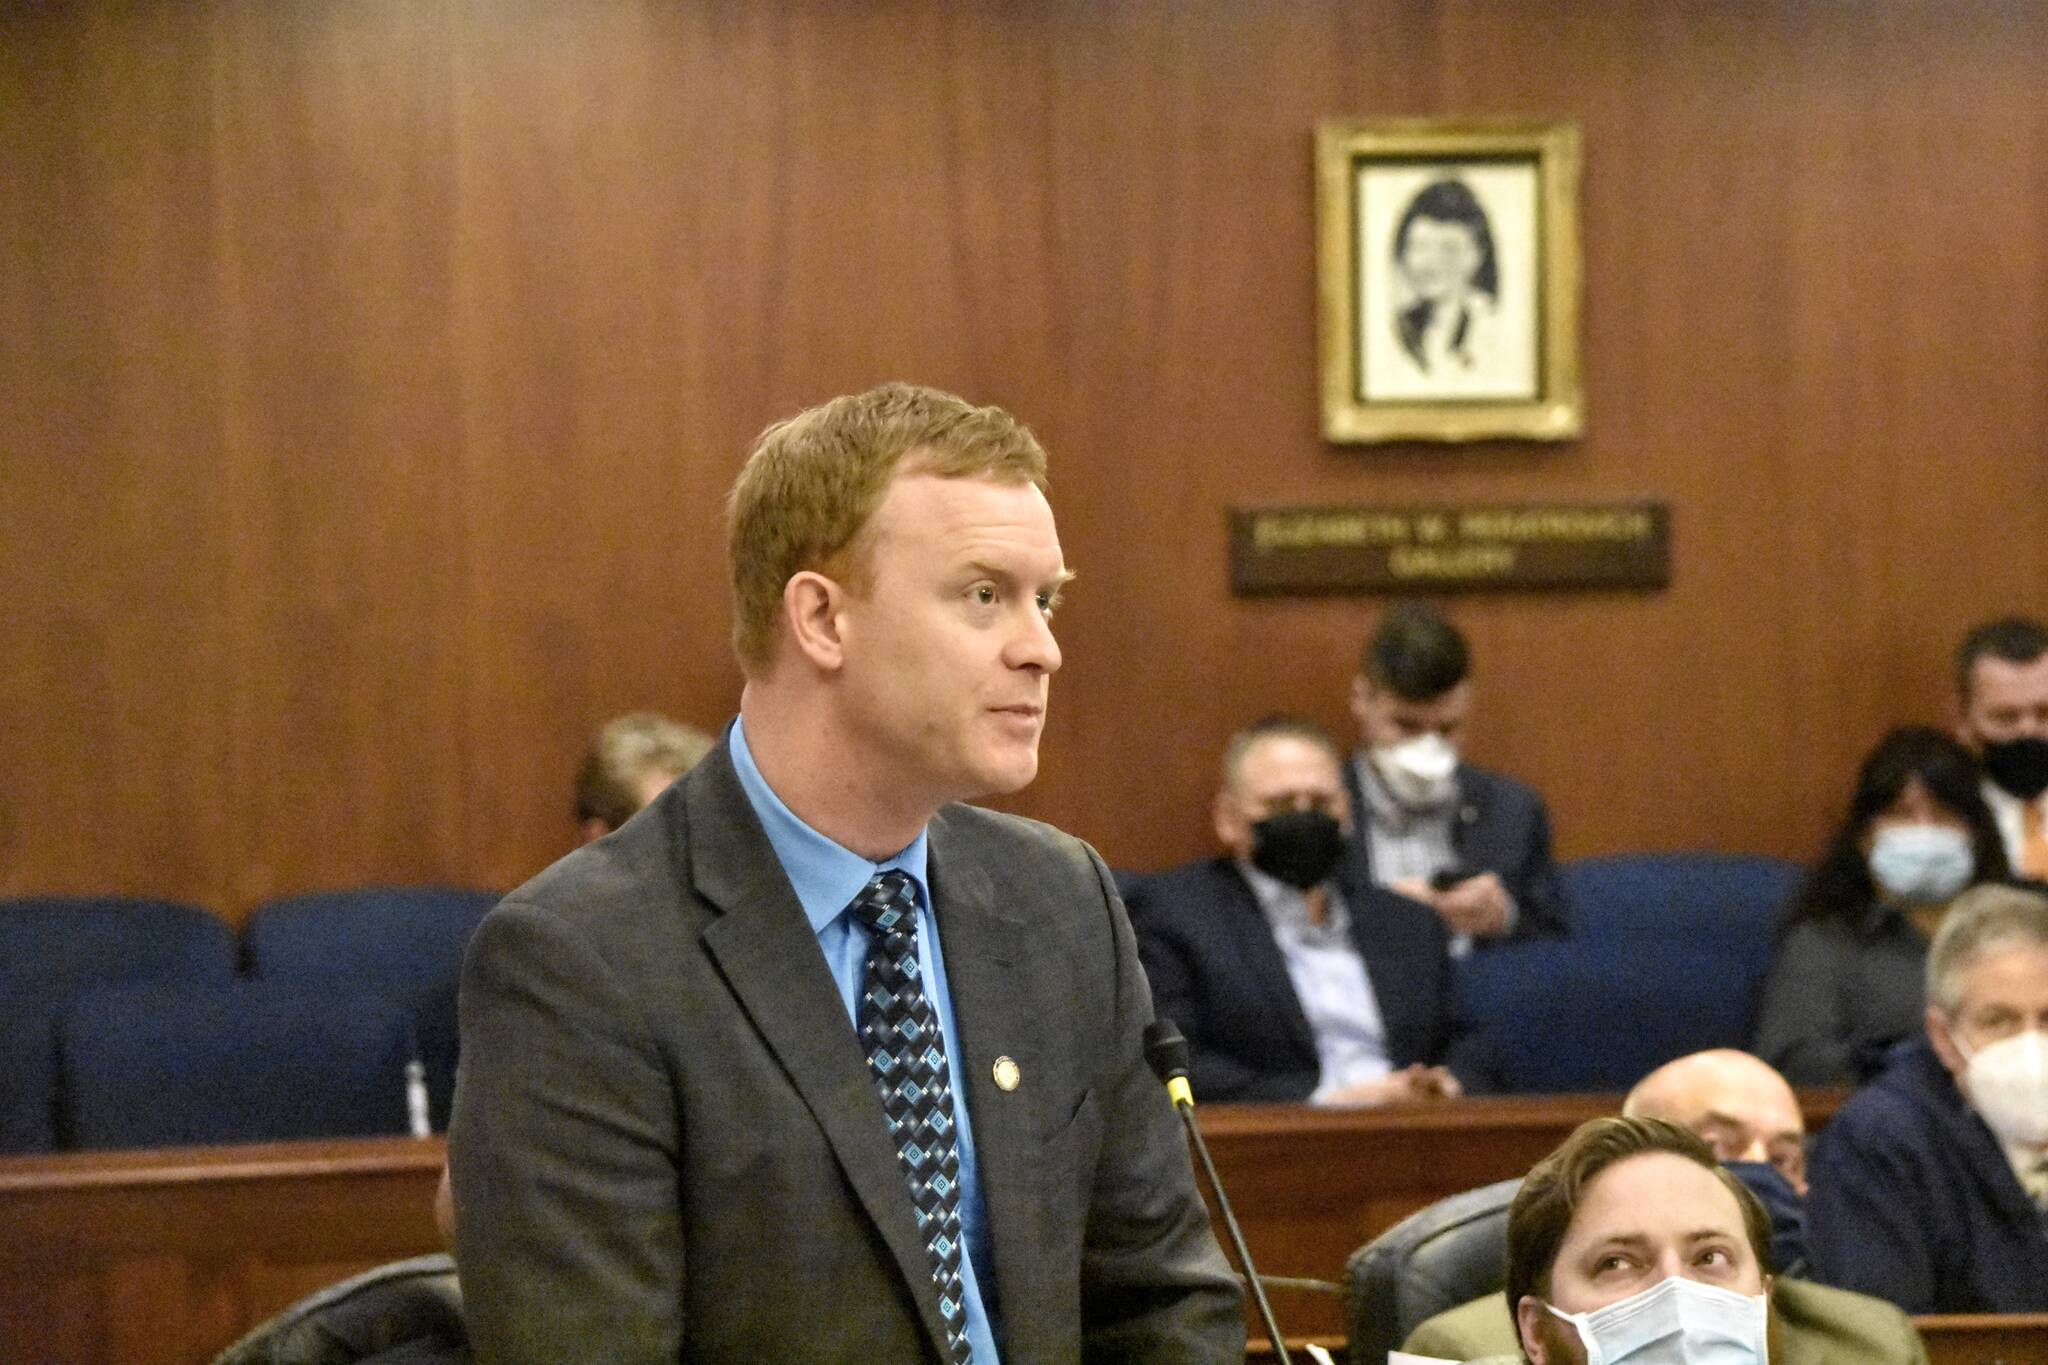 Rep. David Eastman, R-Wasilla, seen here Feb. 4, 2022, has come under scrutiny from the public and some of his legislative colleagues for his membership in the Oath Keepers, a far-right organization whose leaders have been arrested and charged with sedition for their role in the Jan. 6, 2021 riot at the U.S. Capitol. (Peter Segall / Juneau Empire)